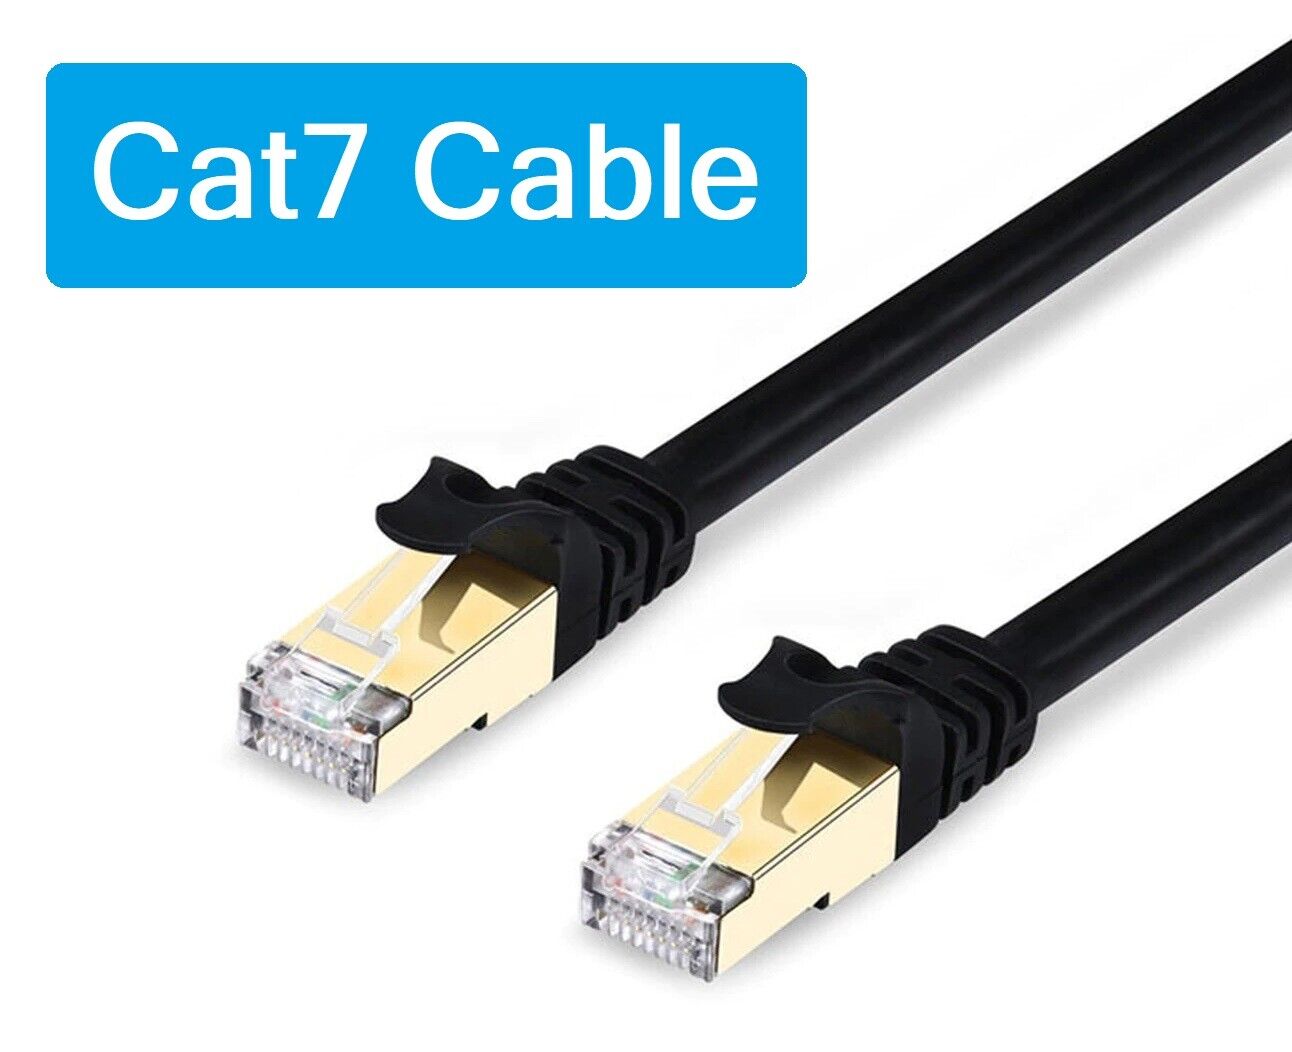 25 ft CAT7 Ethernet Cable 2 PACK - Premium High Speed LAN Patch Cord Gold Plated